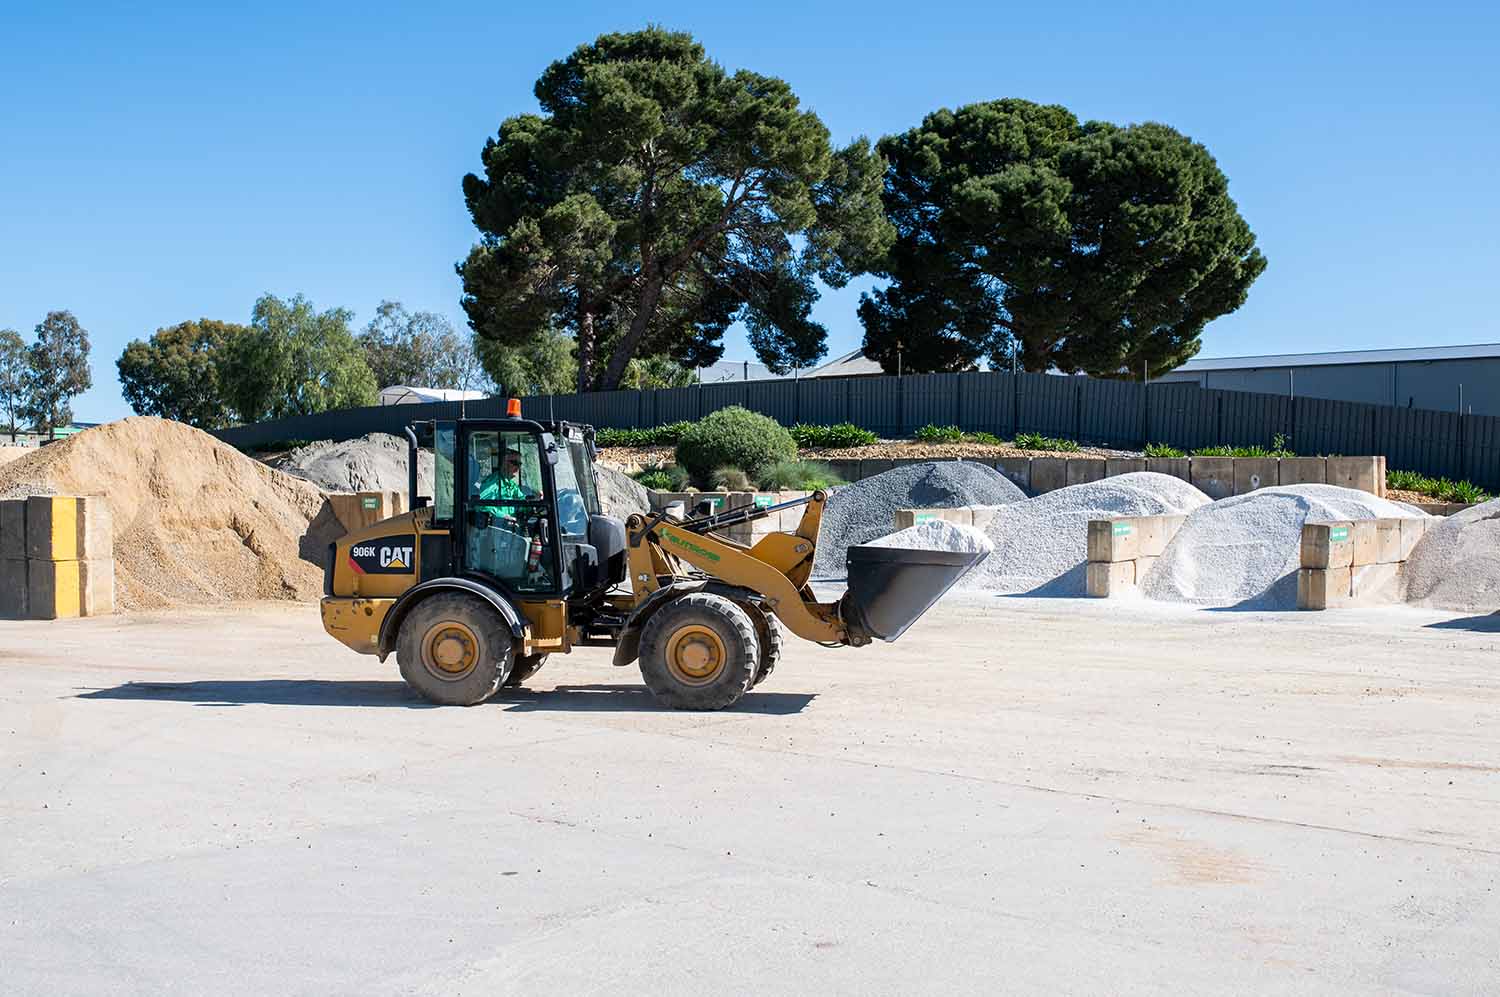 Landscape Supplies - Site Delivery - Huge Range of Products. Willaston Gawler